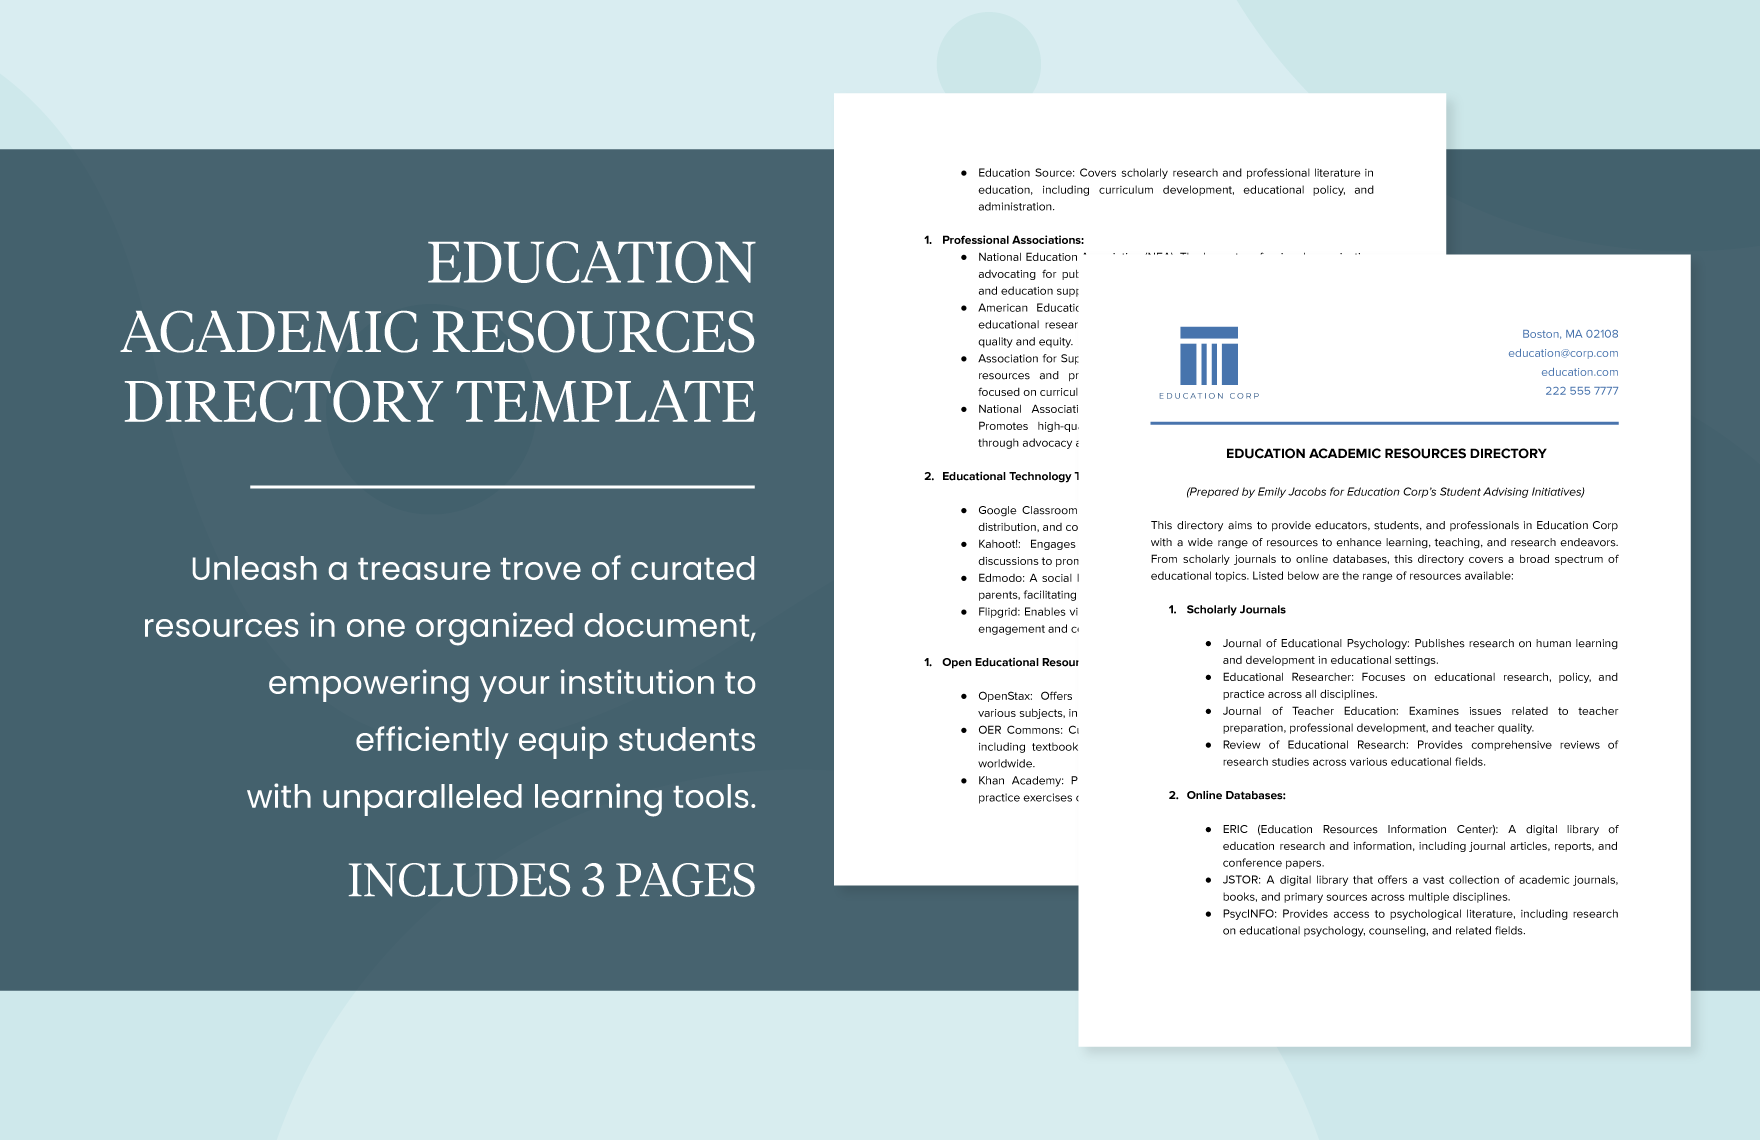 Education Academic Resources Directory Template in Word, Google Docs, PDF